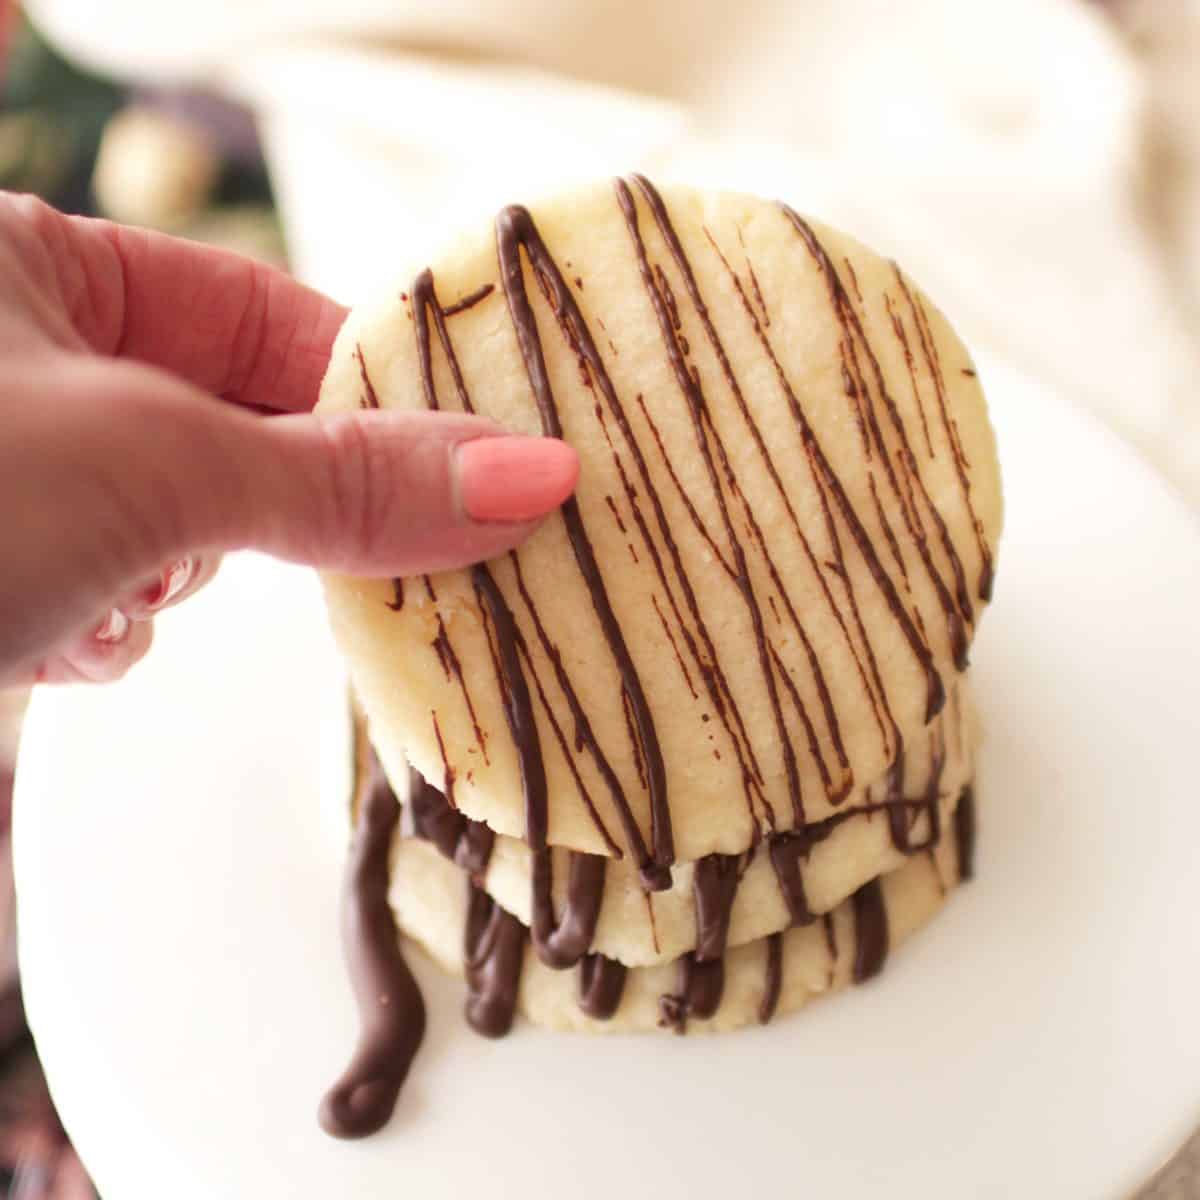 fingers holding up a shortbread cookie with a chocolate drizzle.